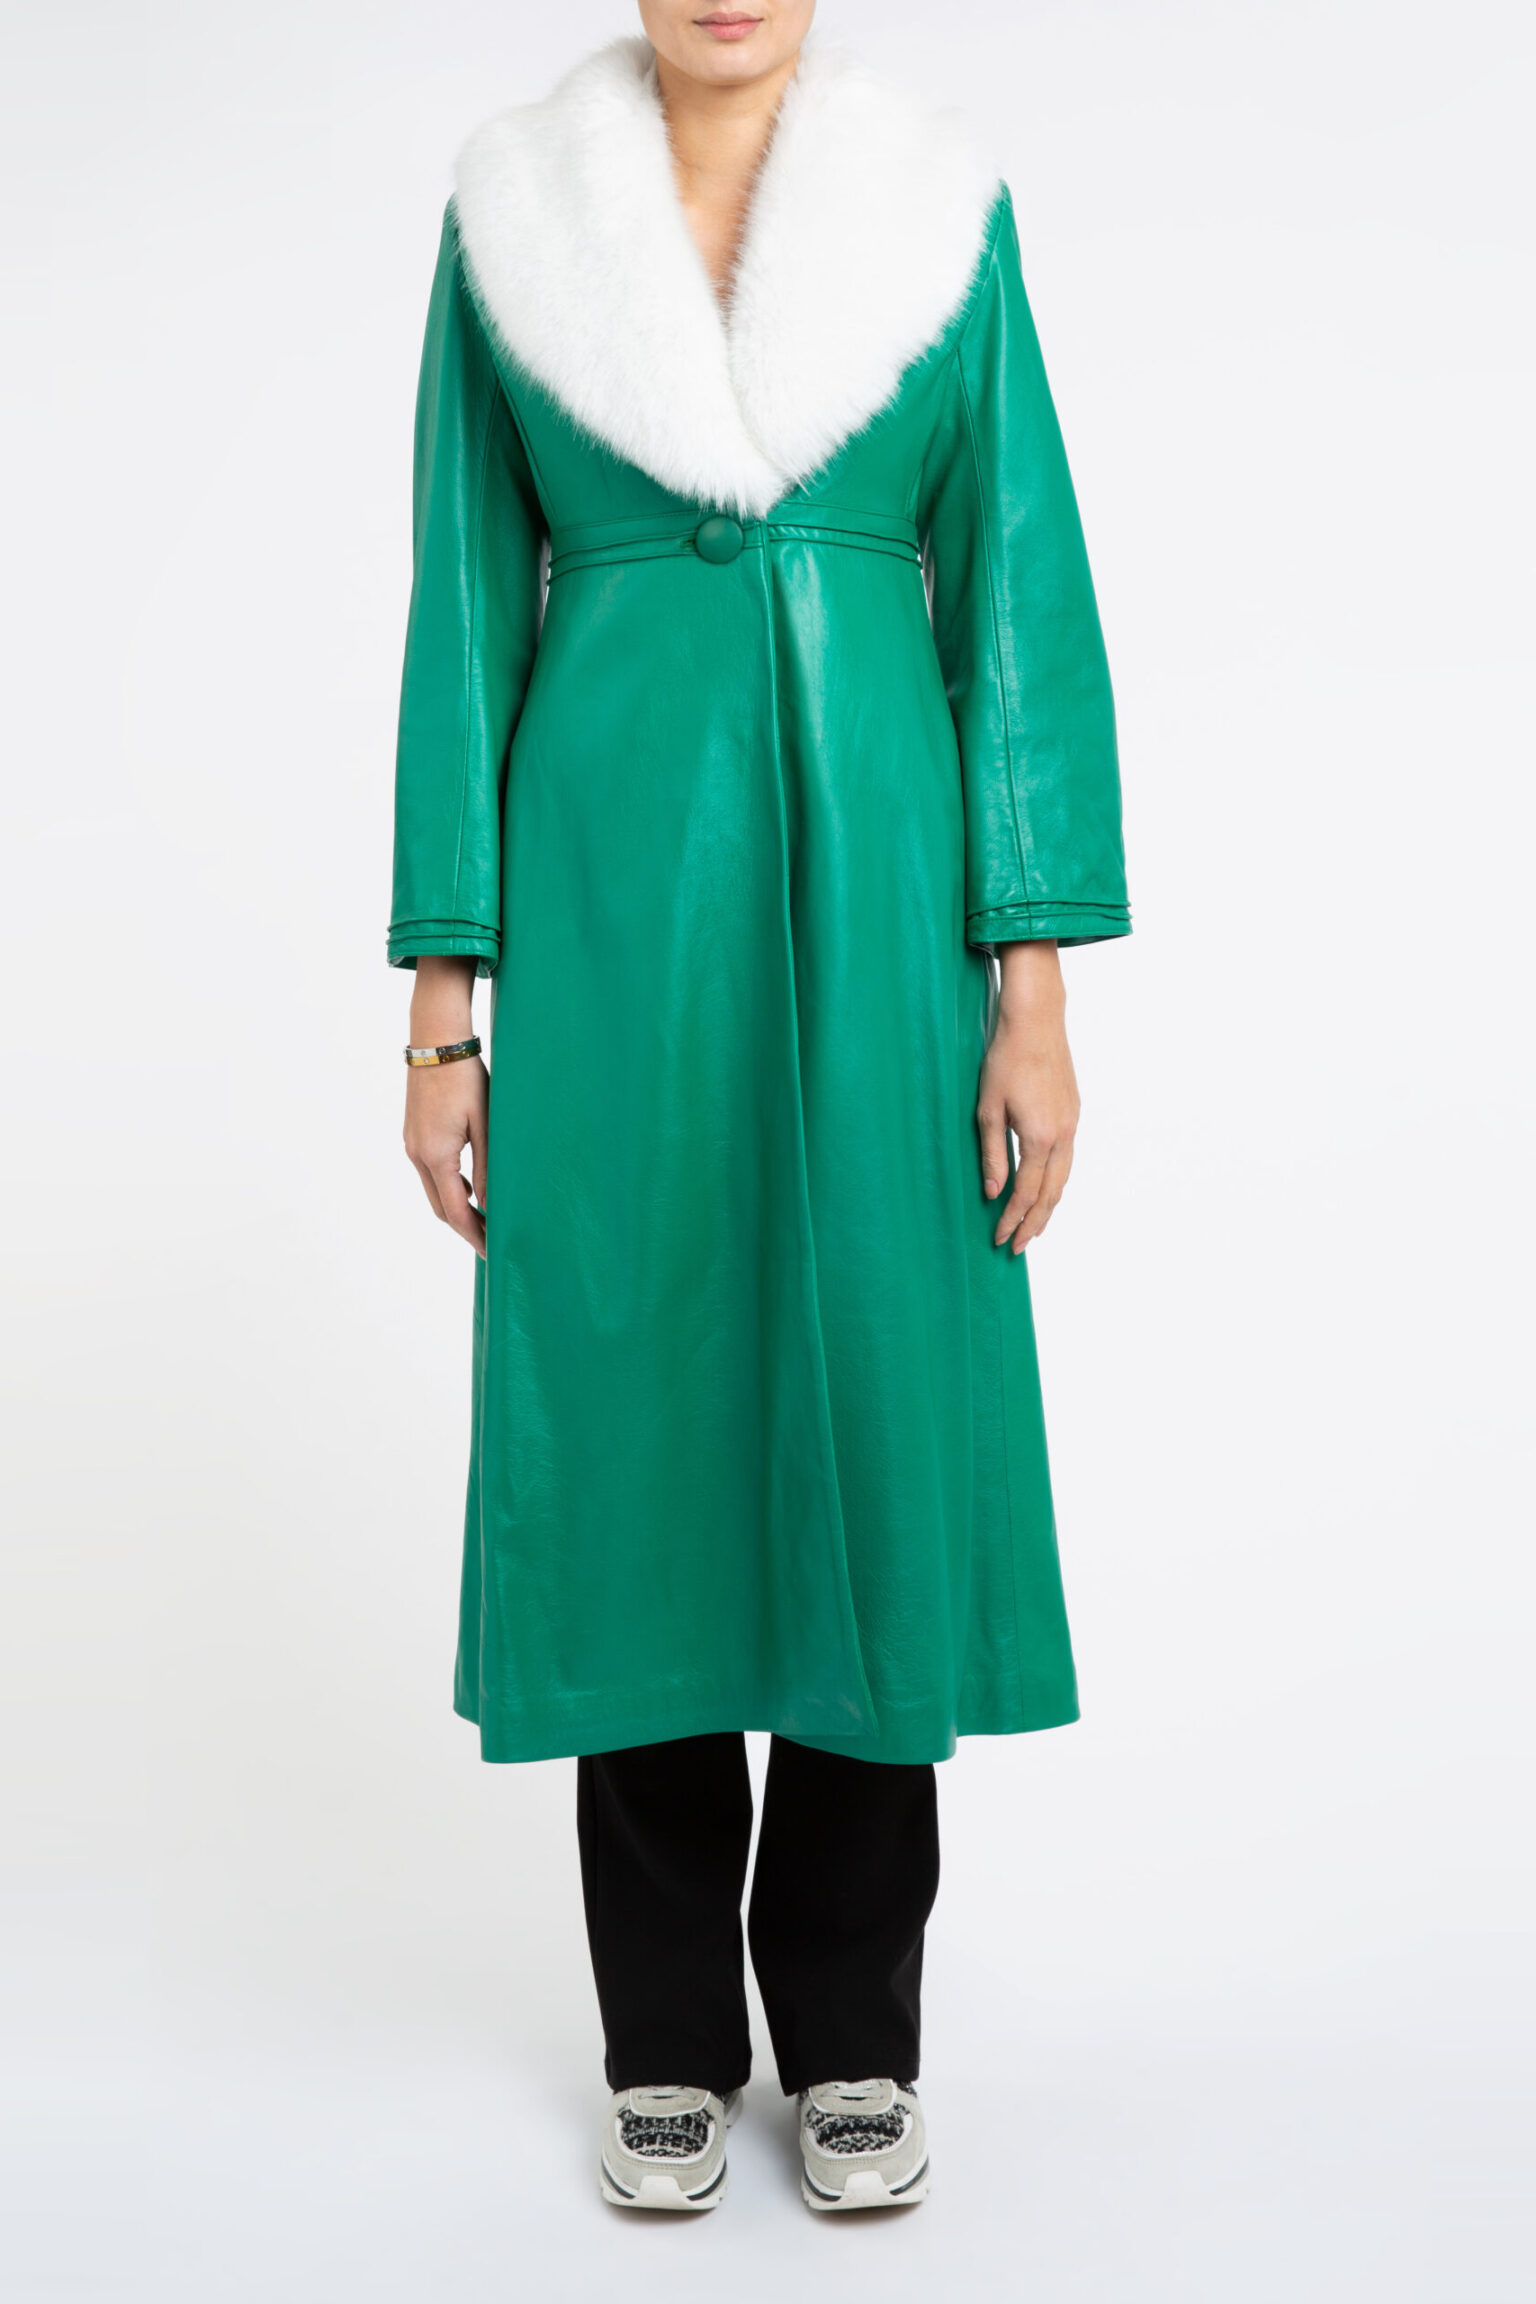 Edward Leather Trench Coat in Green and White -SOLD OUT